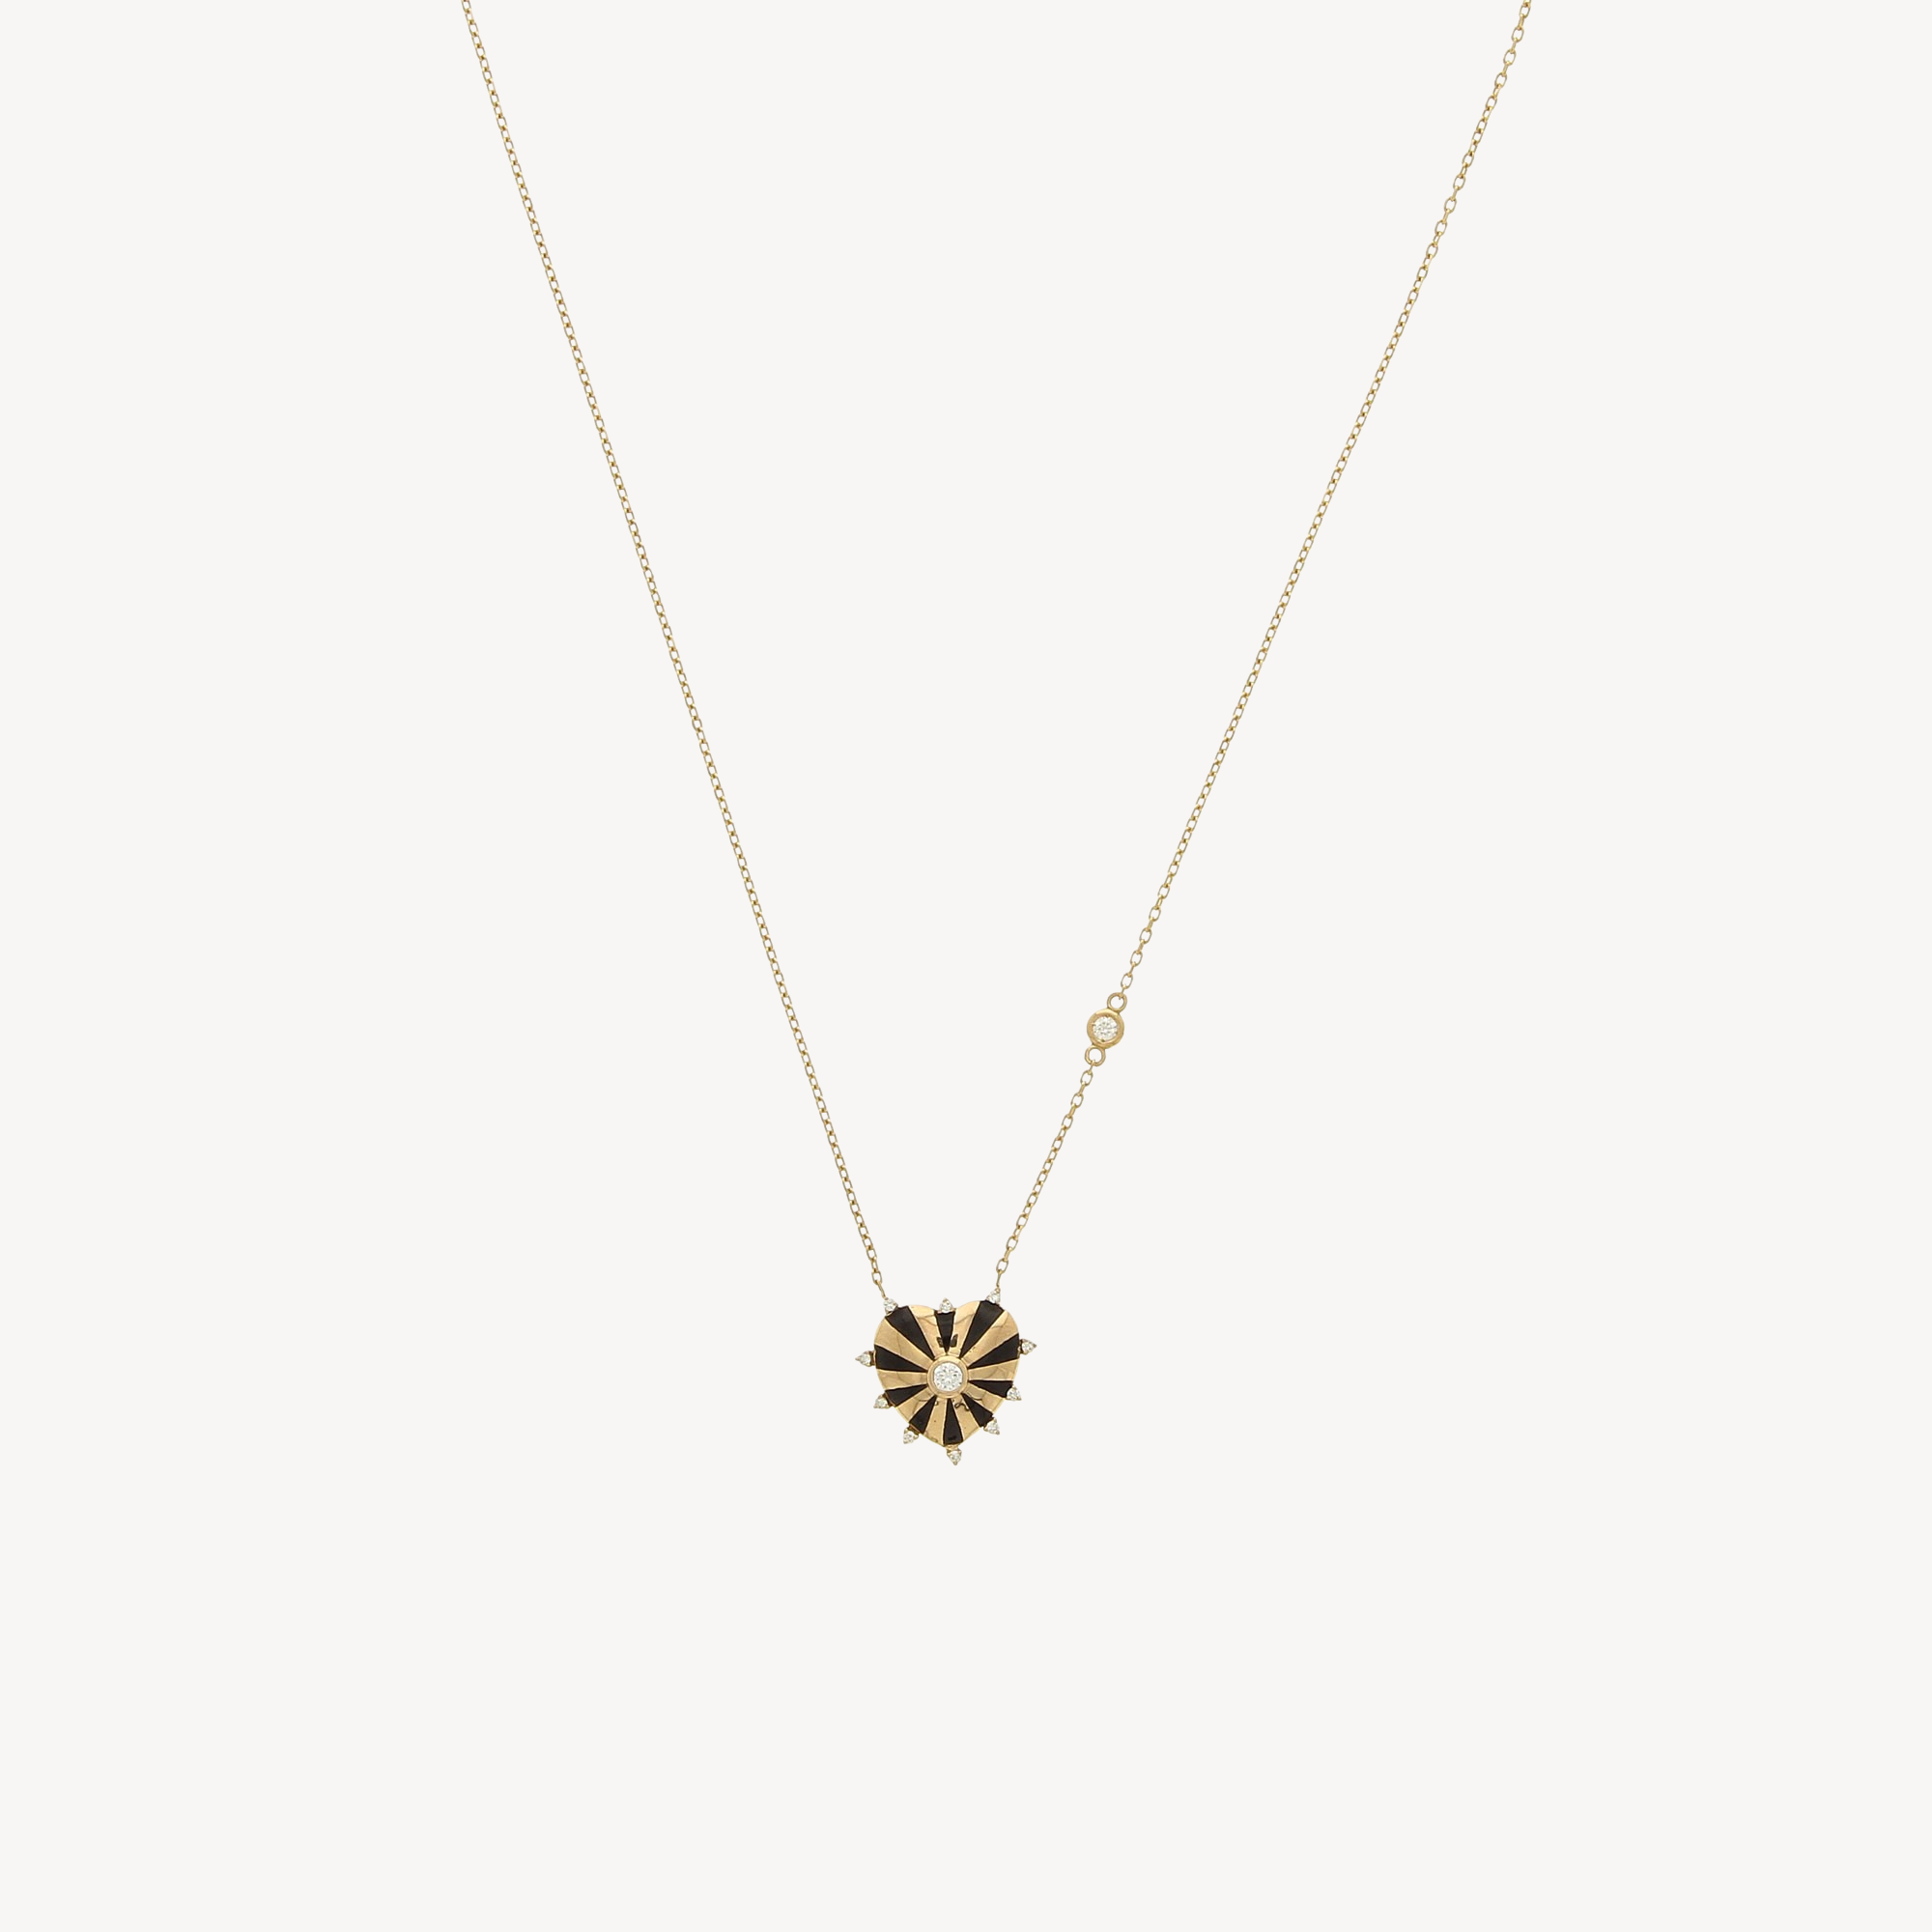 Collier Small Mila Coeur Email Noir